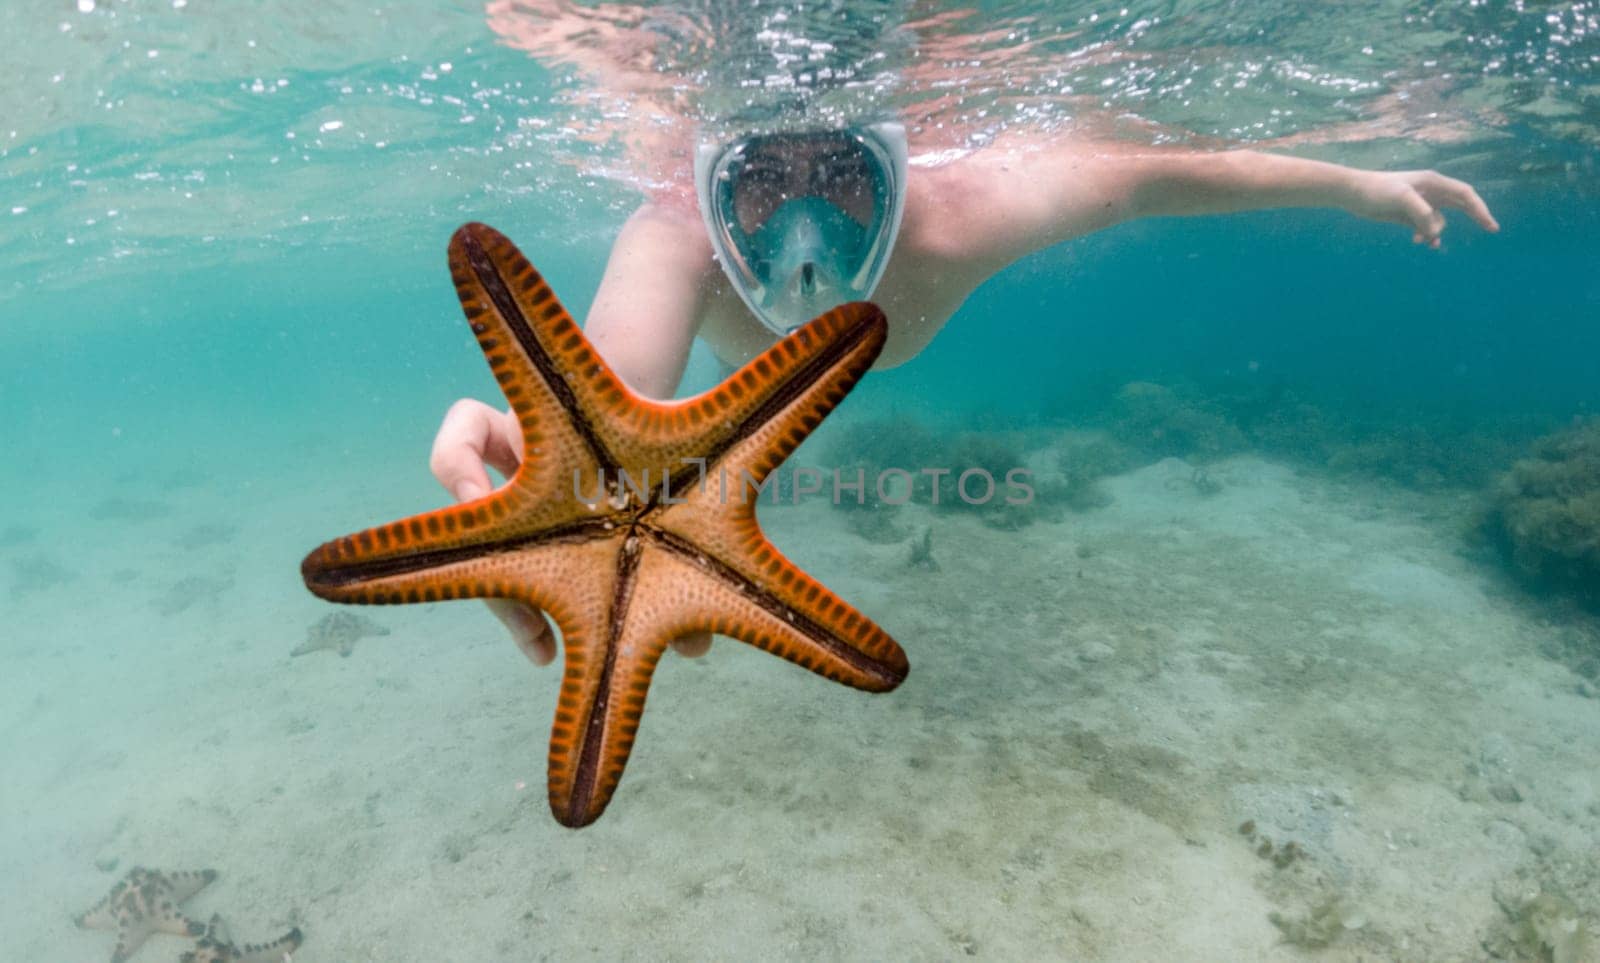 Snorkeler reaches for starfish in crystal clear tropical waters by Busker